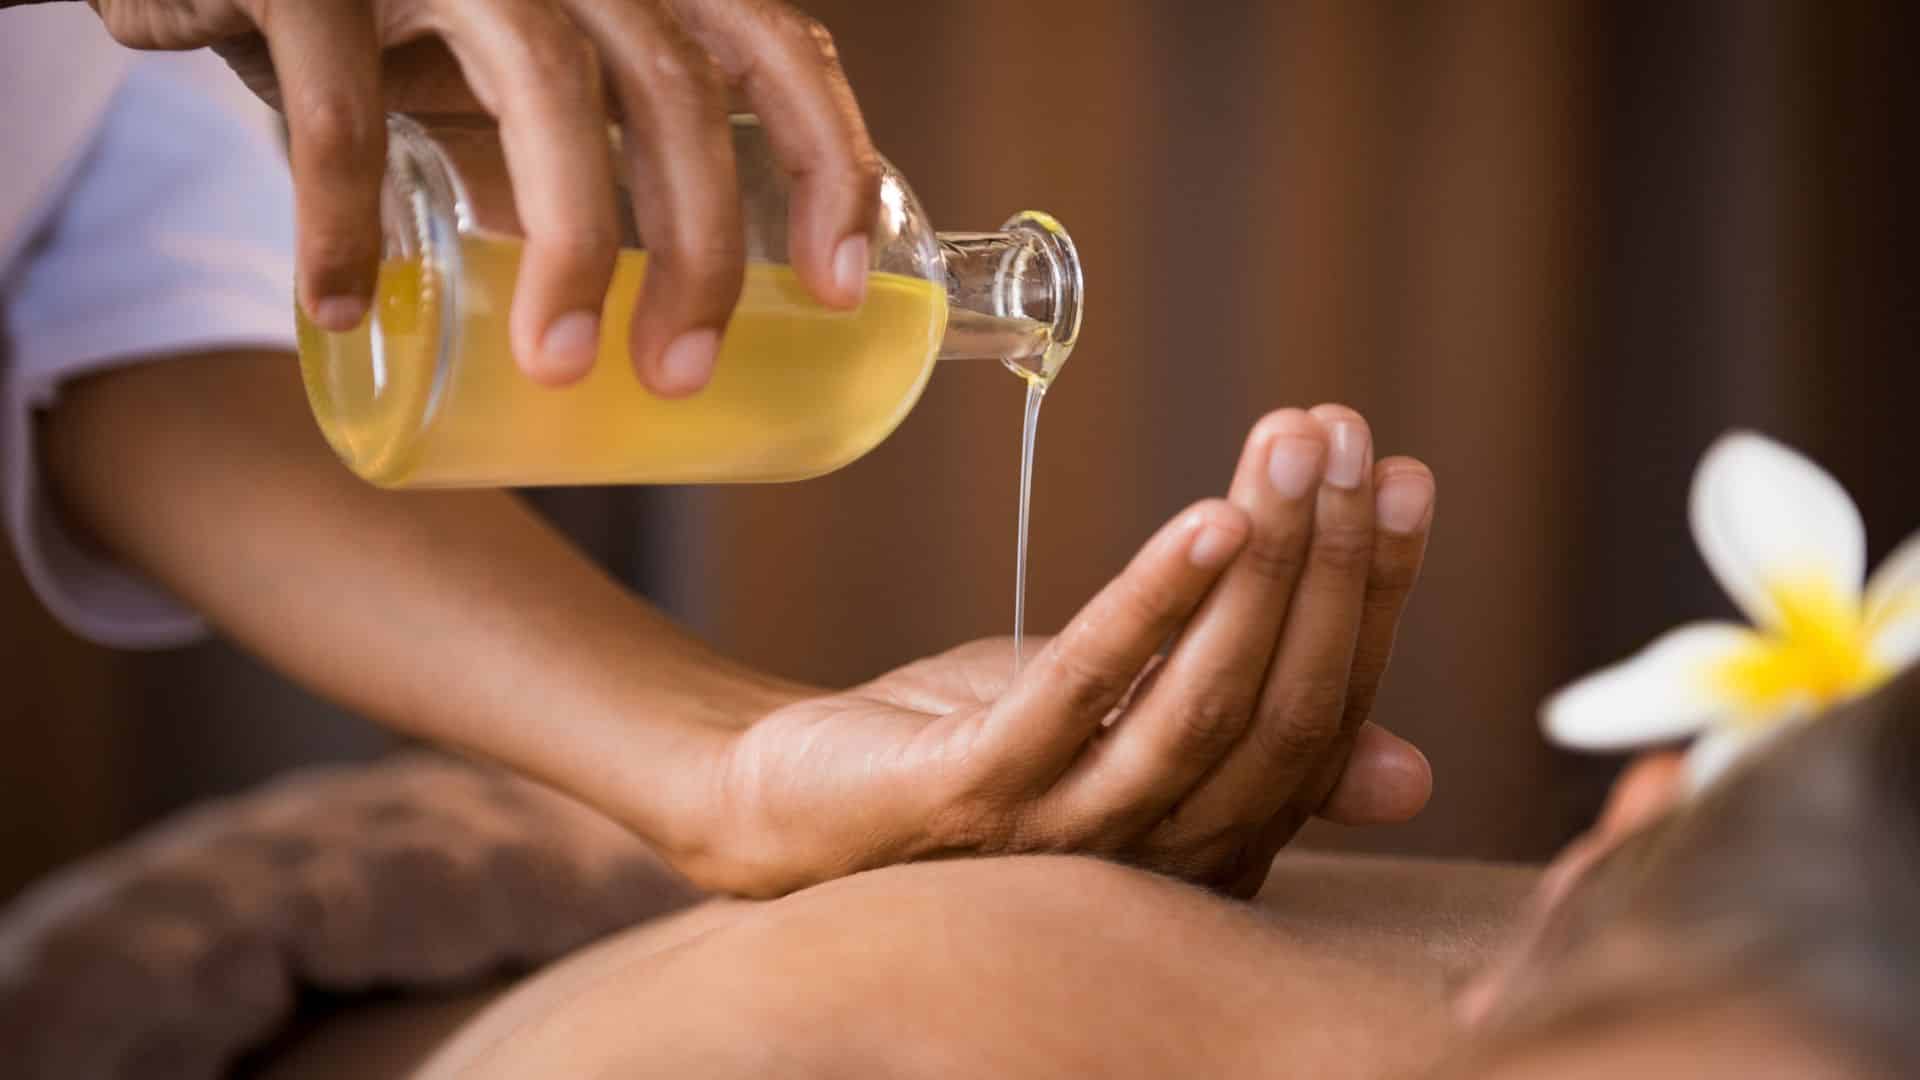 hand pouring massage oil into another hand over the back of a massage patient who has a white and yellow flower behind their ear